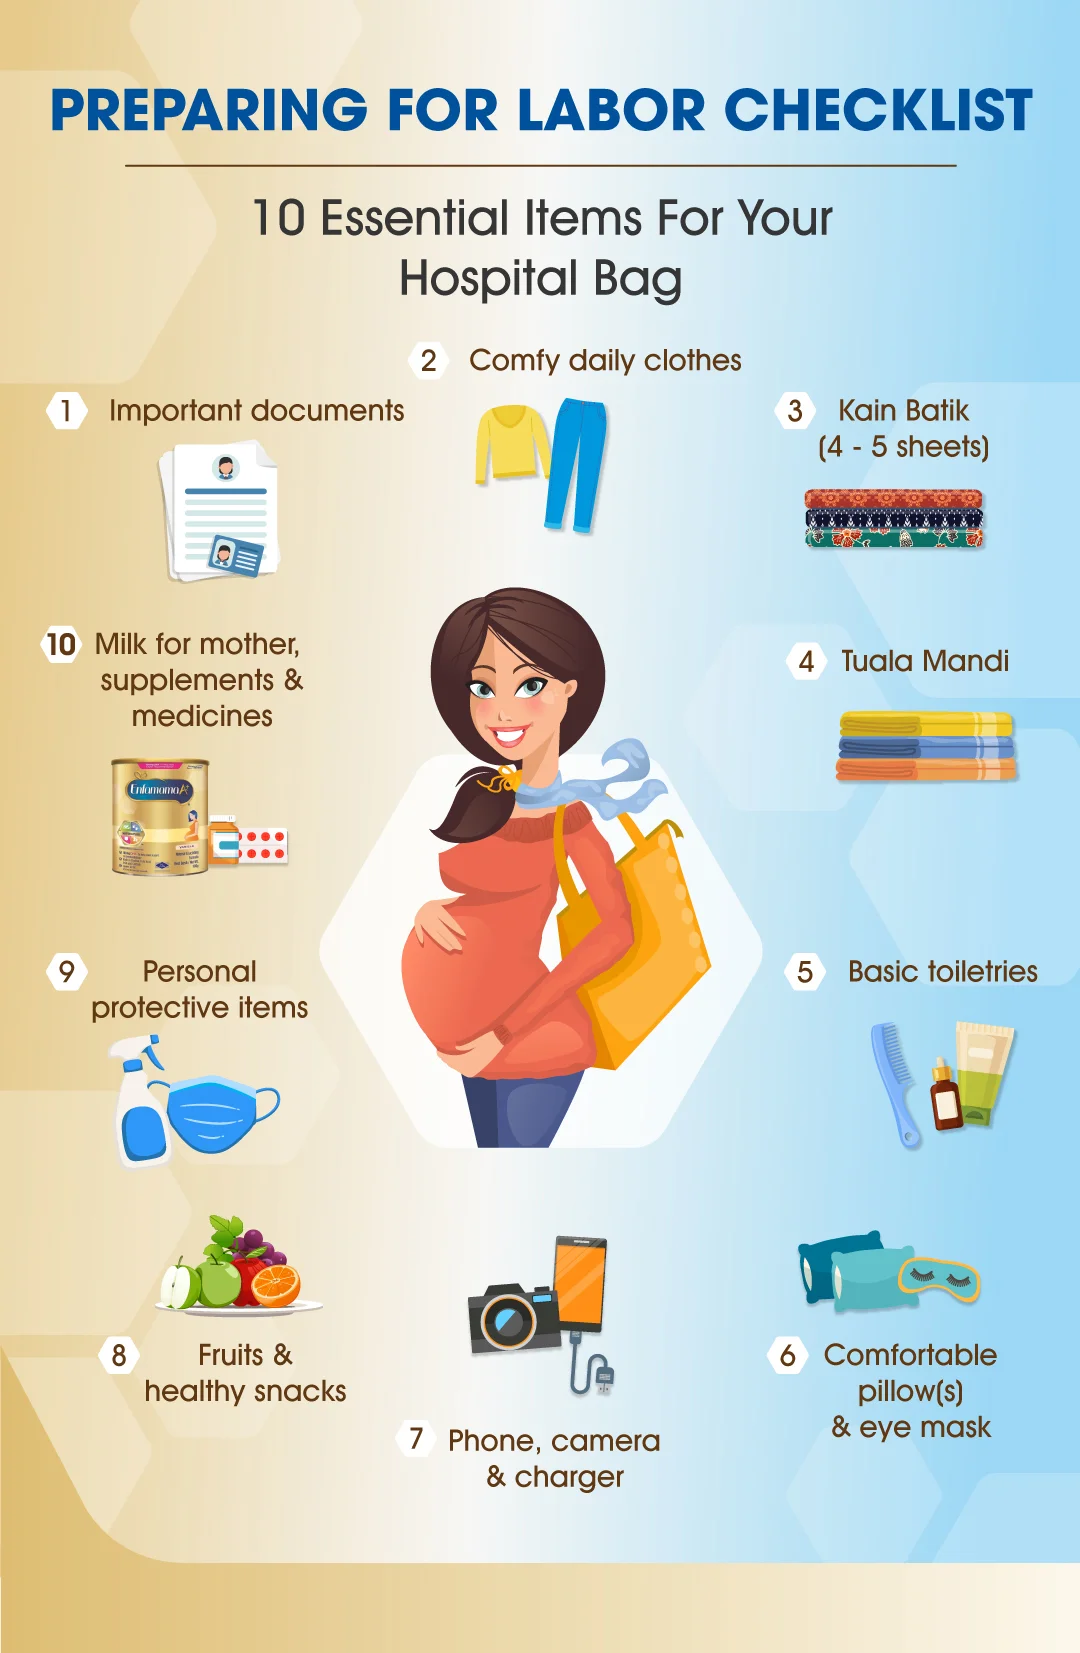 Preparing for Labor Checklist: 10 Essential Items For Your Hospital Bag